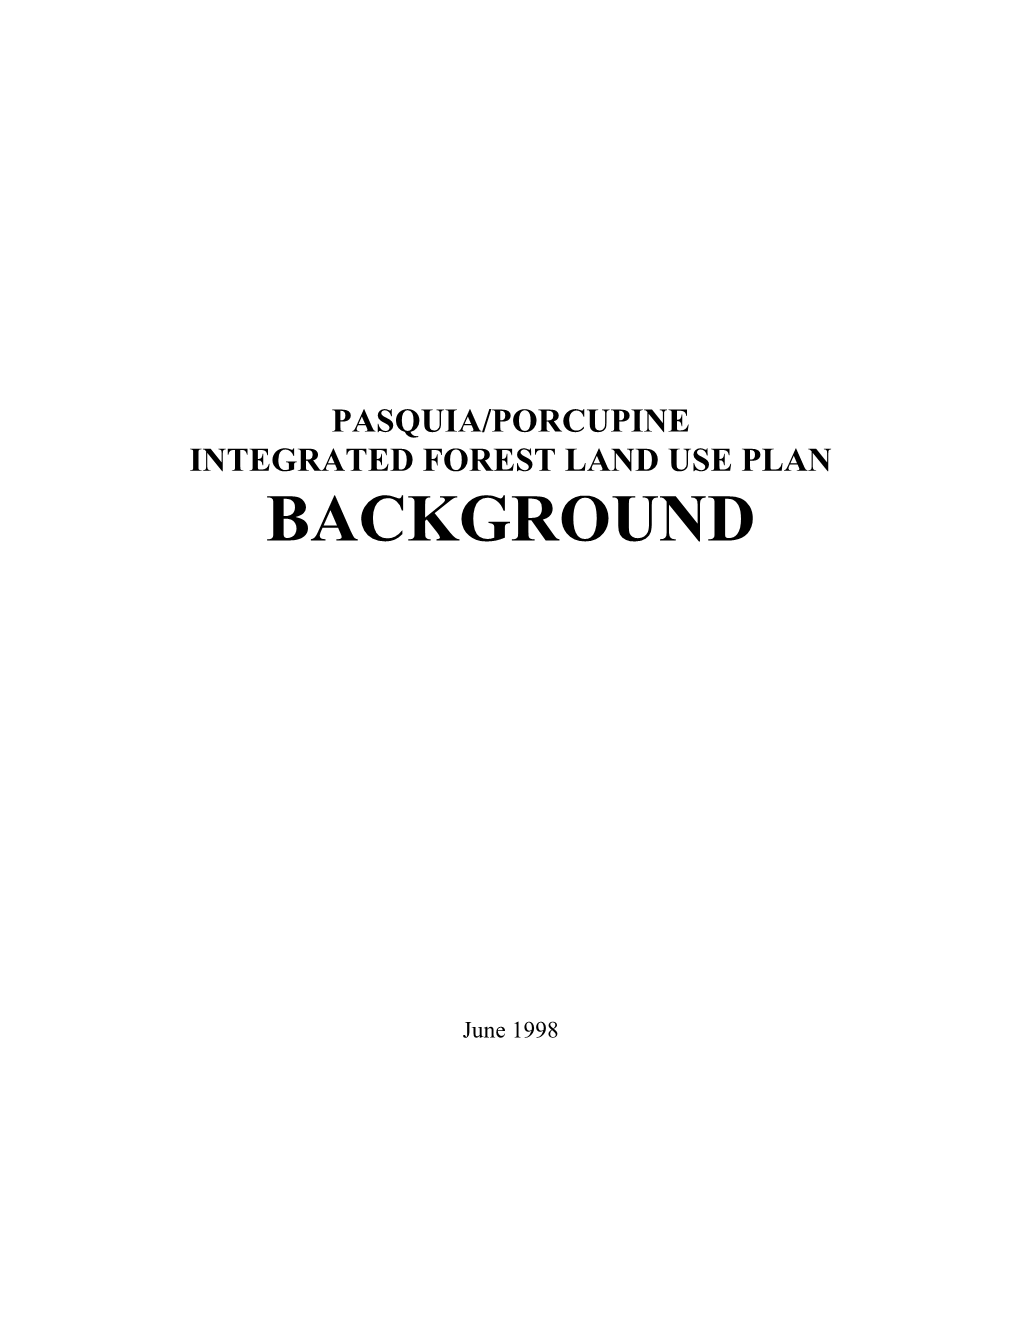 Pasquia/Porcupine Integrated Forest Land Use Plan Background